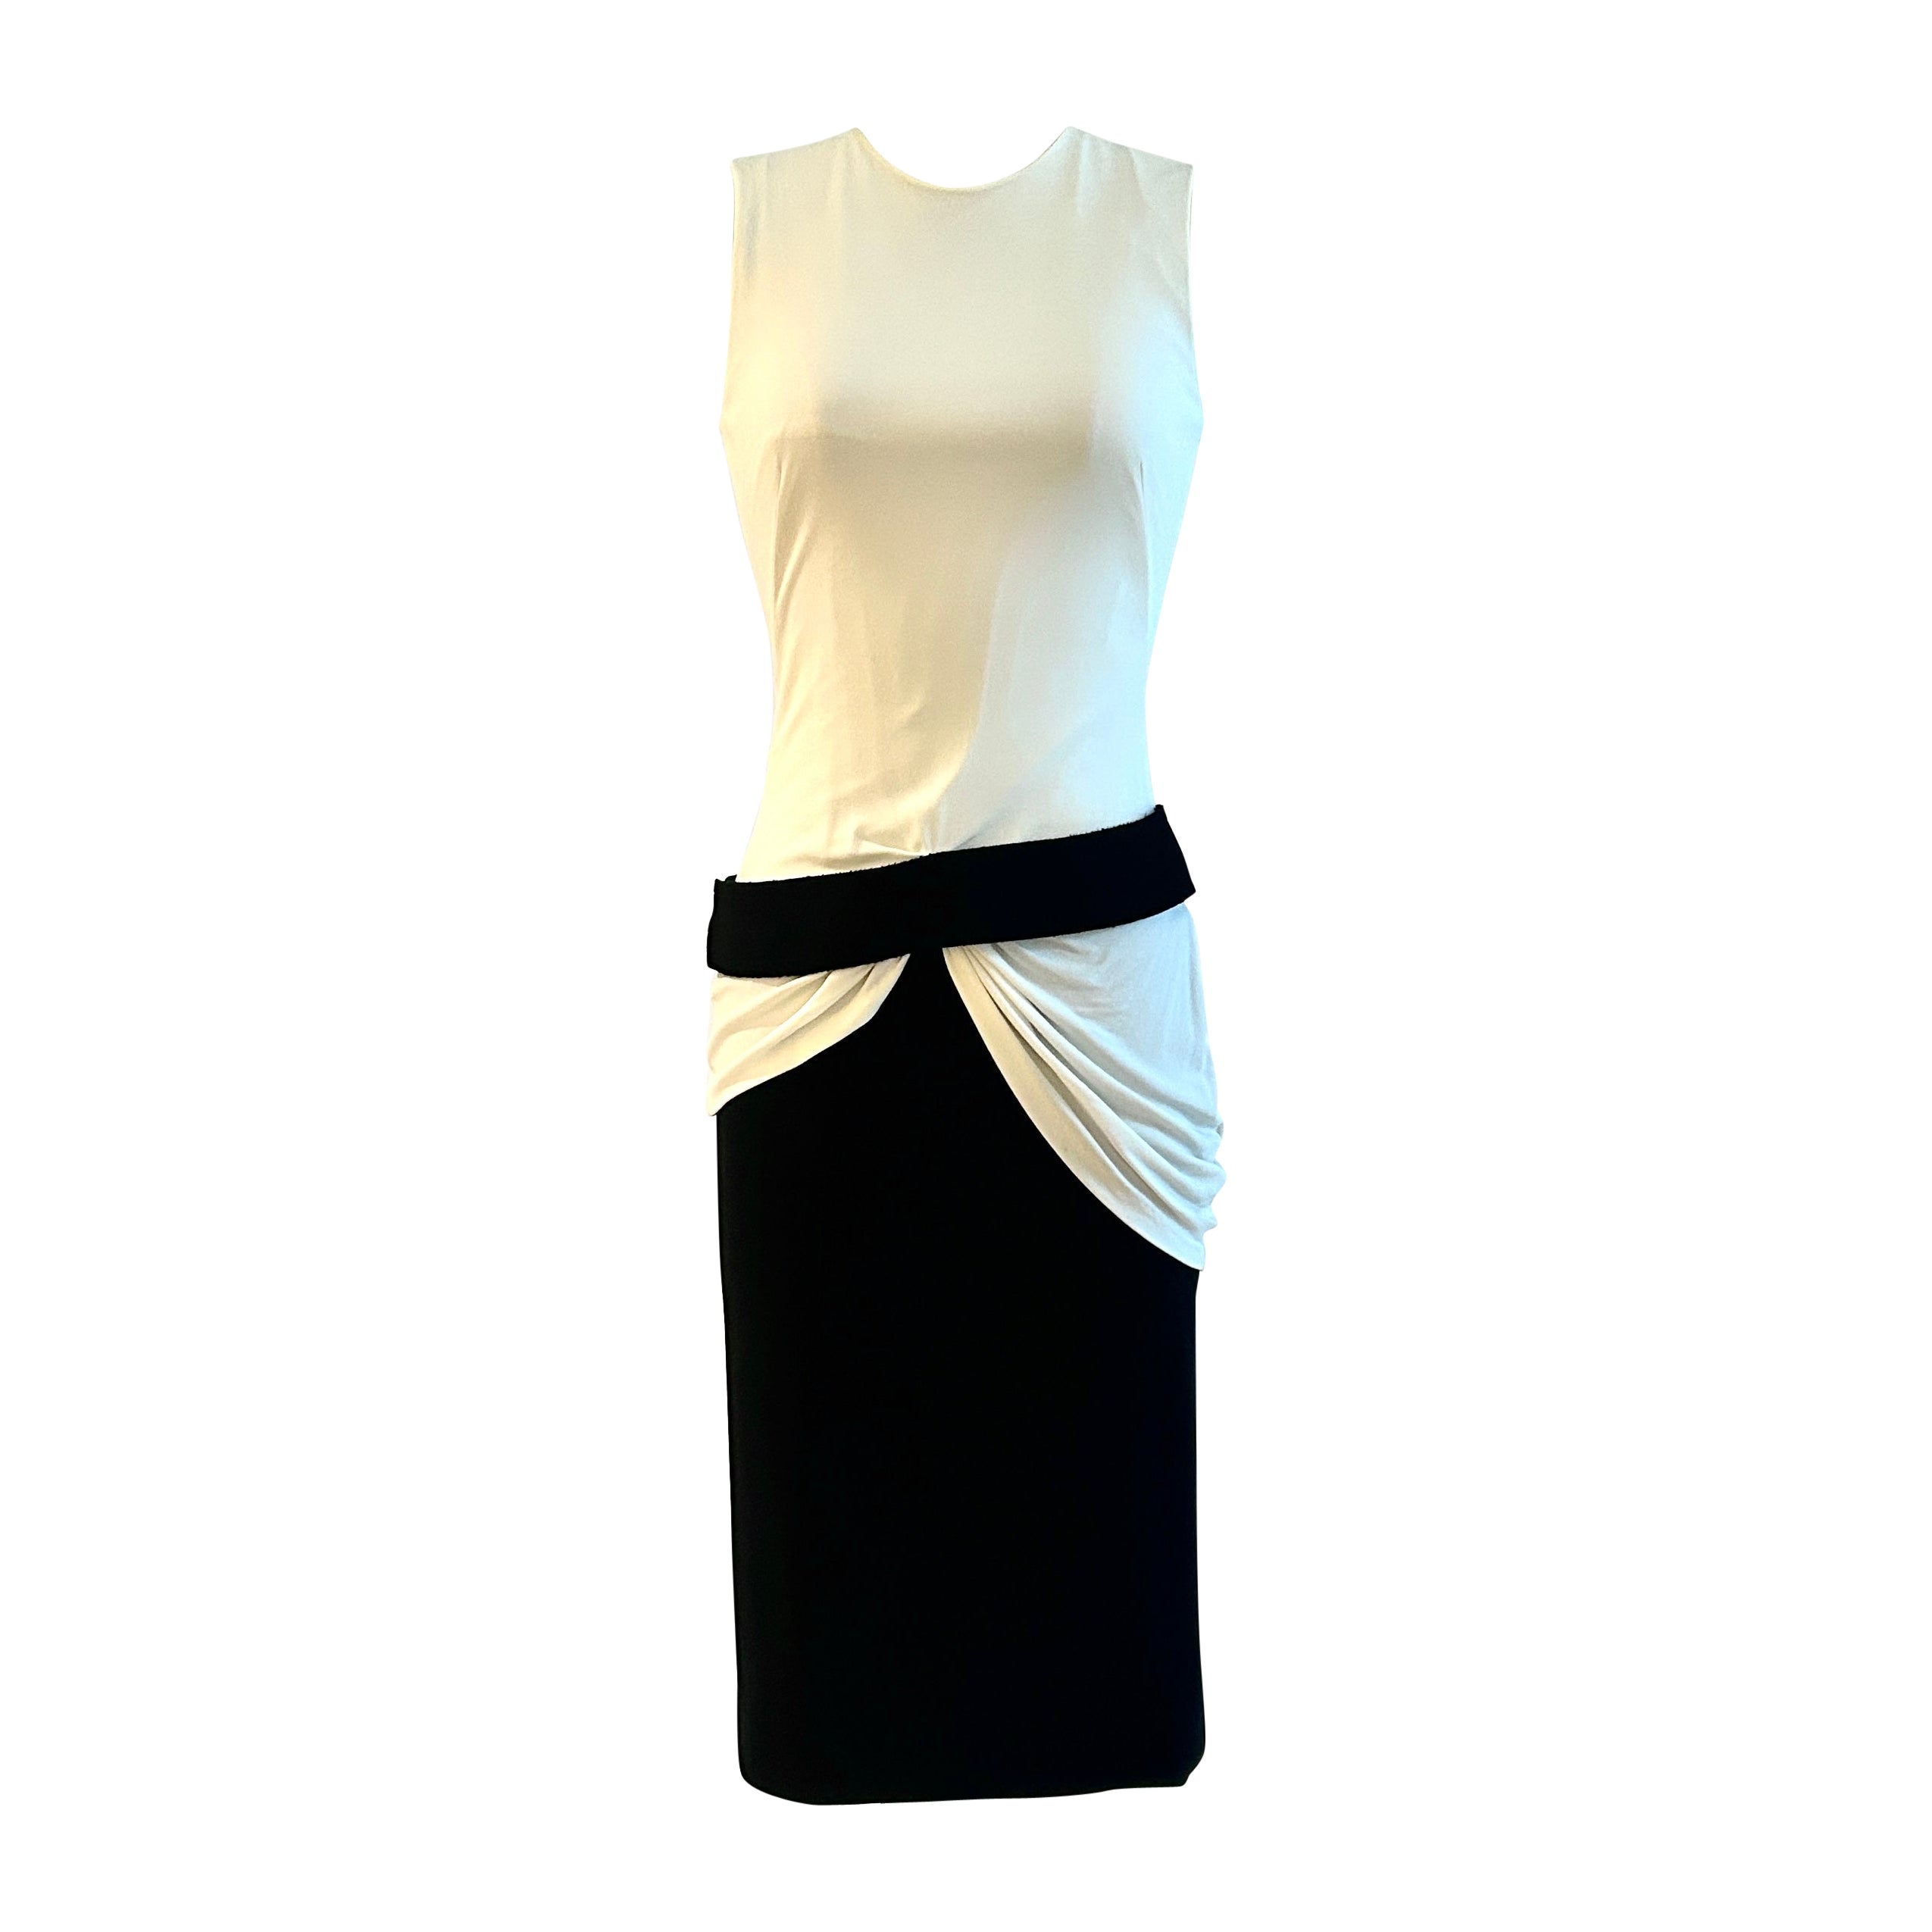 Alexander McQueen Black and White Draped Belted Dress 